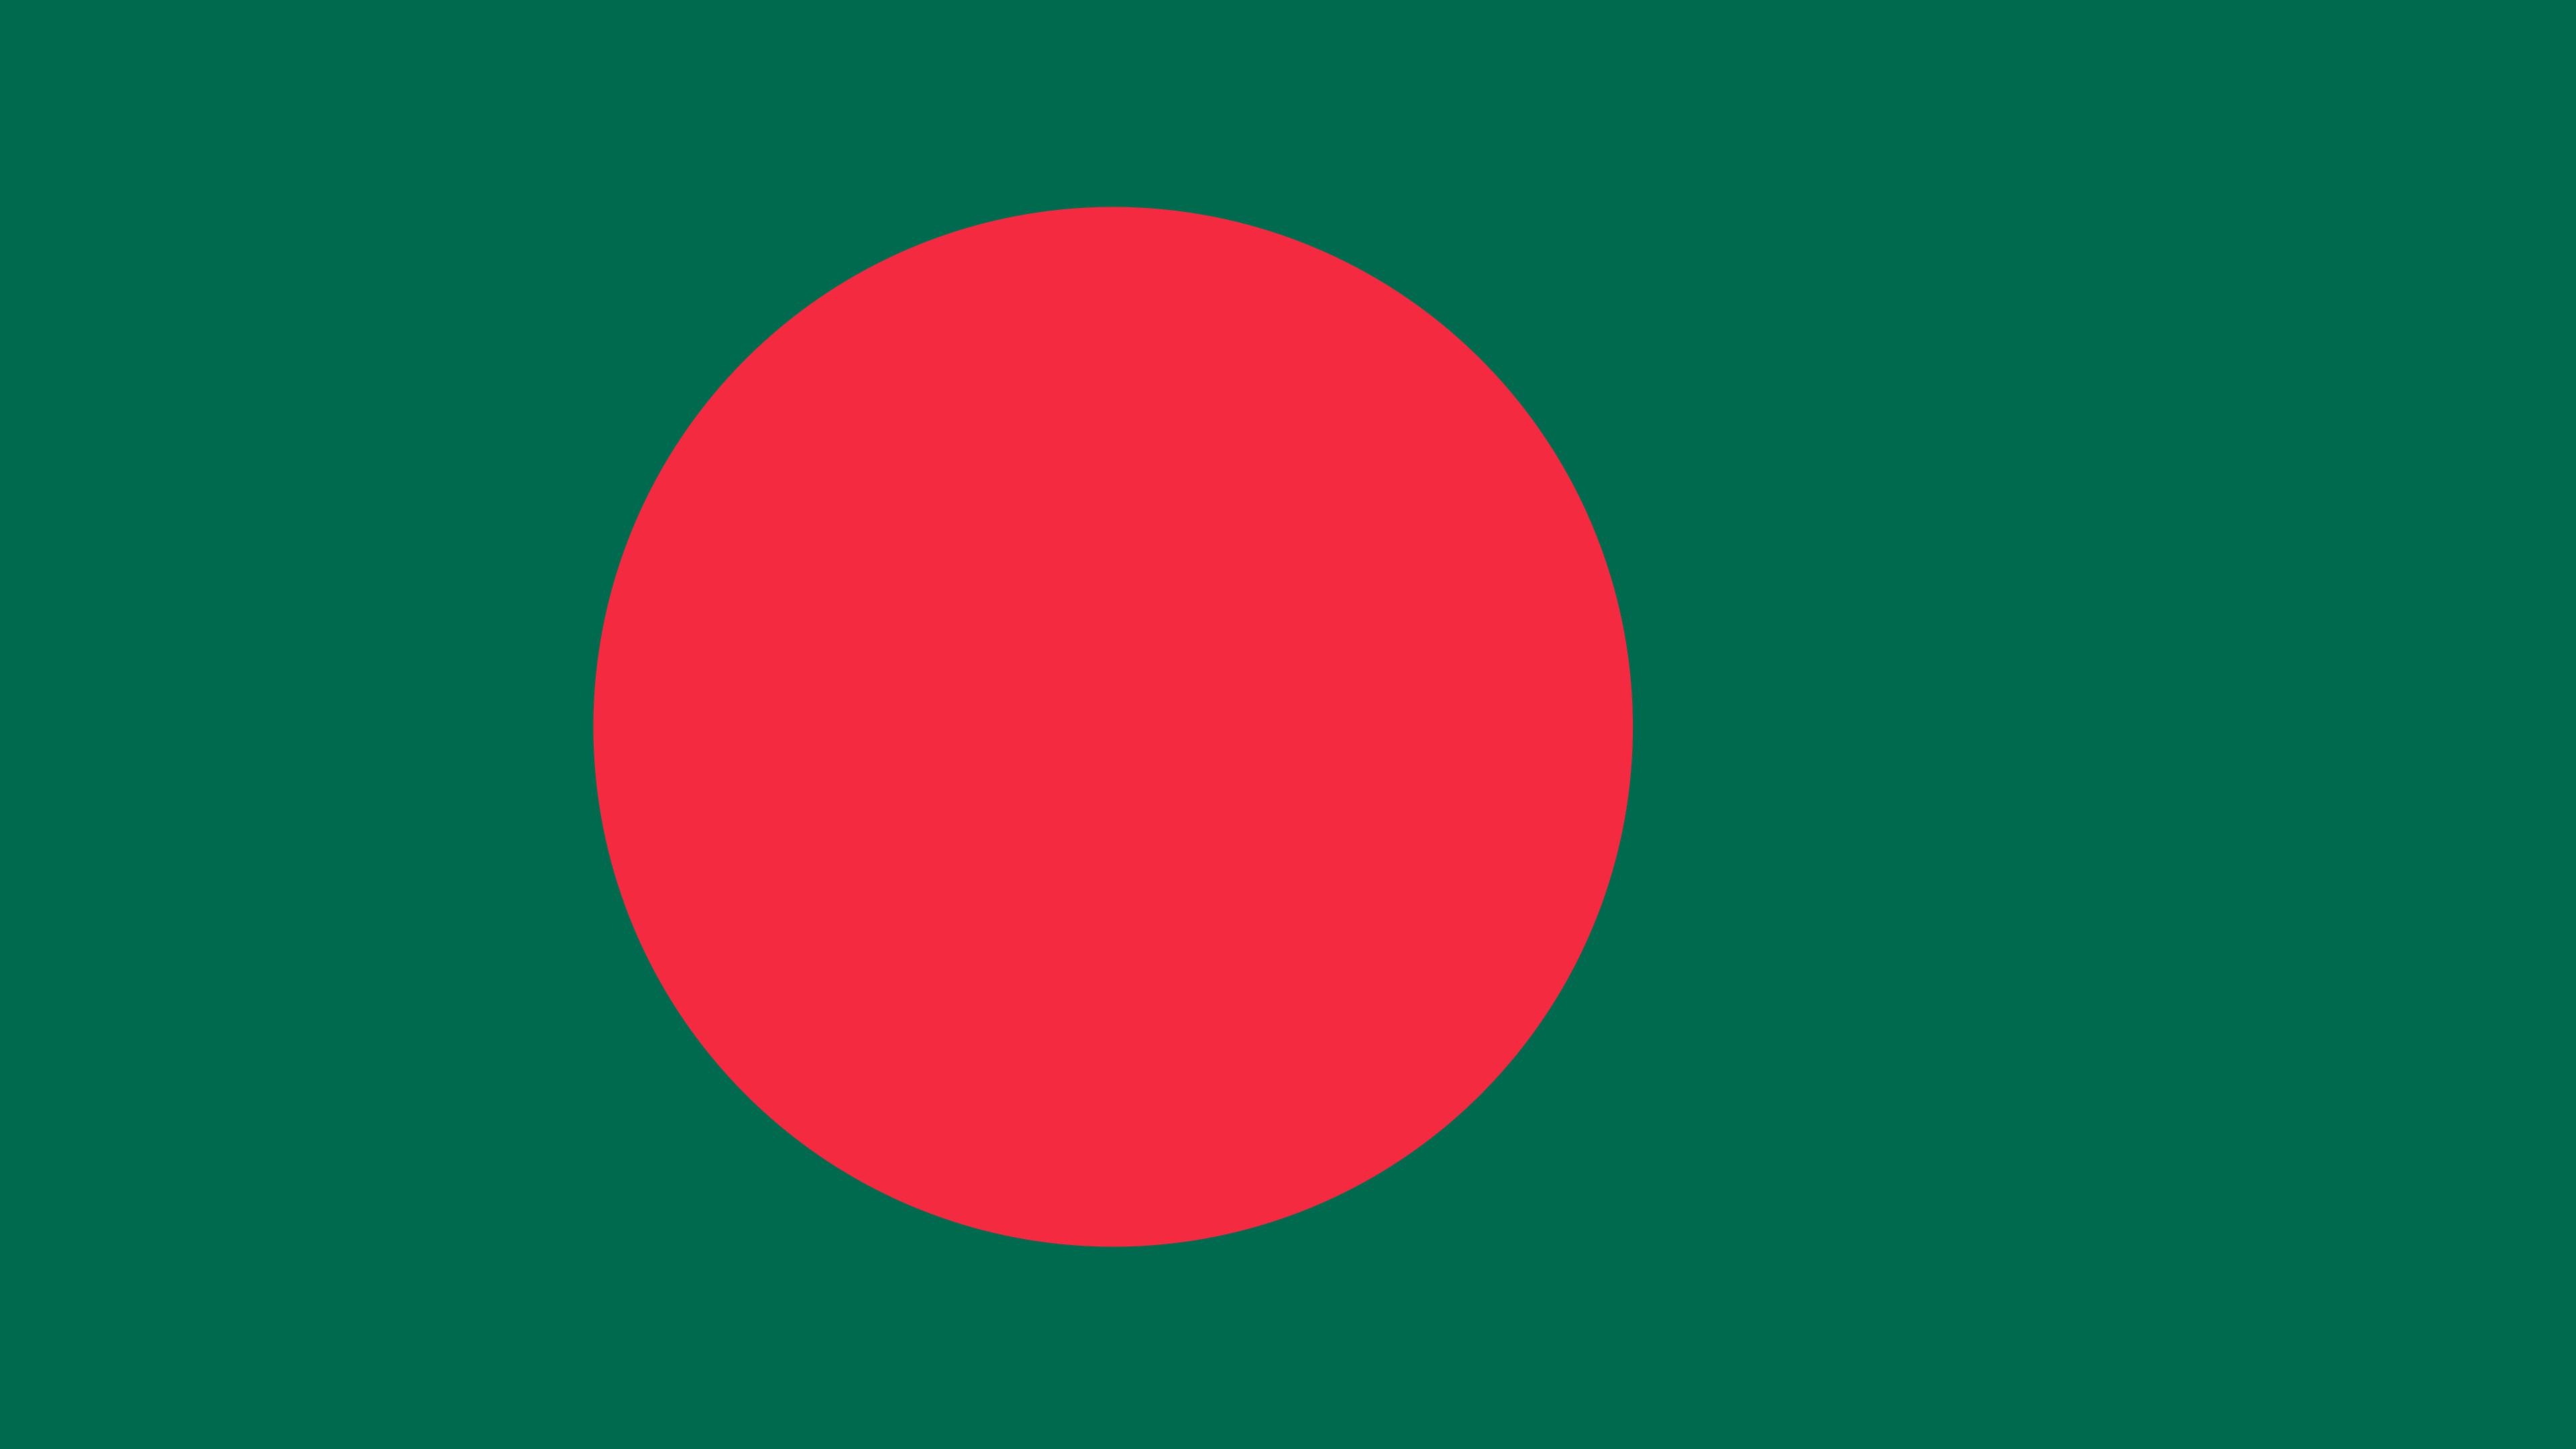 Bangladesh: A country in South Asia, The national flag. 3840x2160 4K Background.